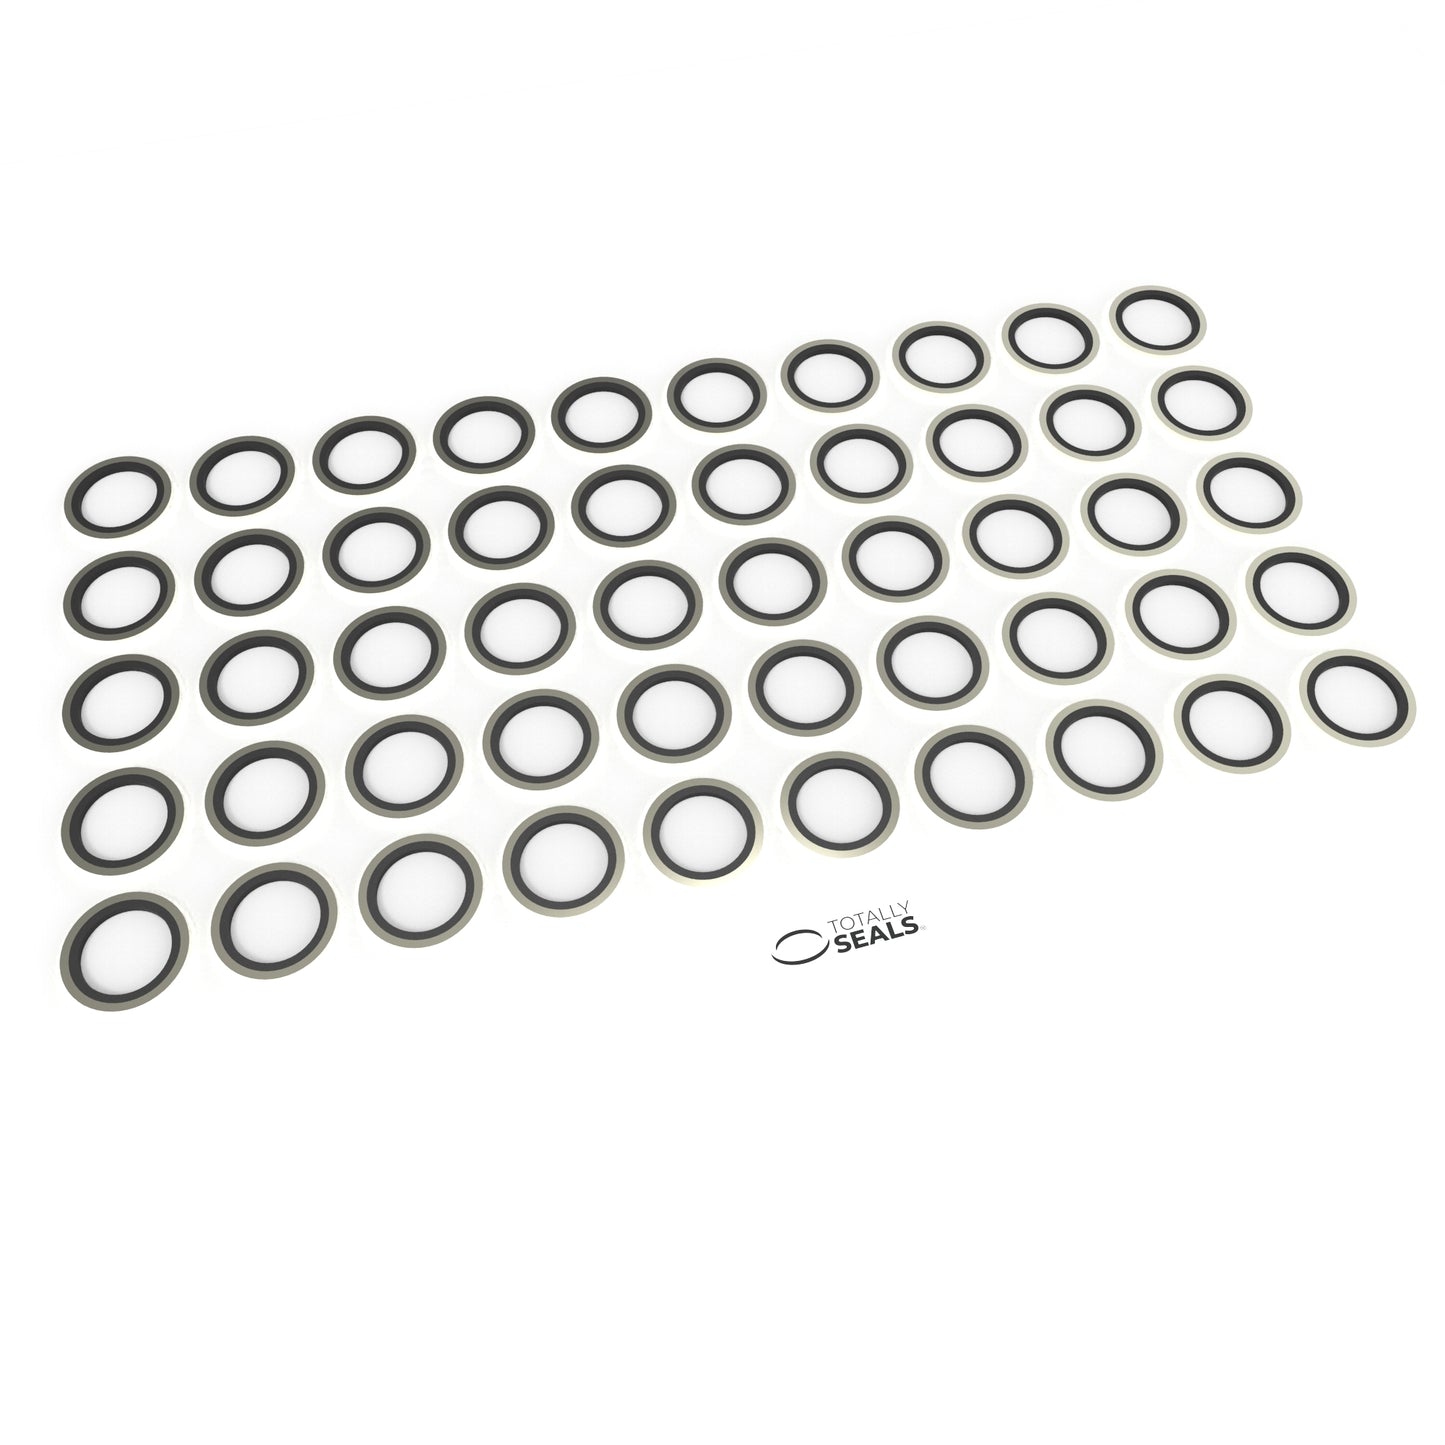 M14 Bonded Seals (Dowty Washers) - Totally Seals®